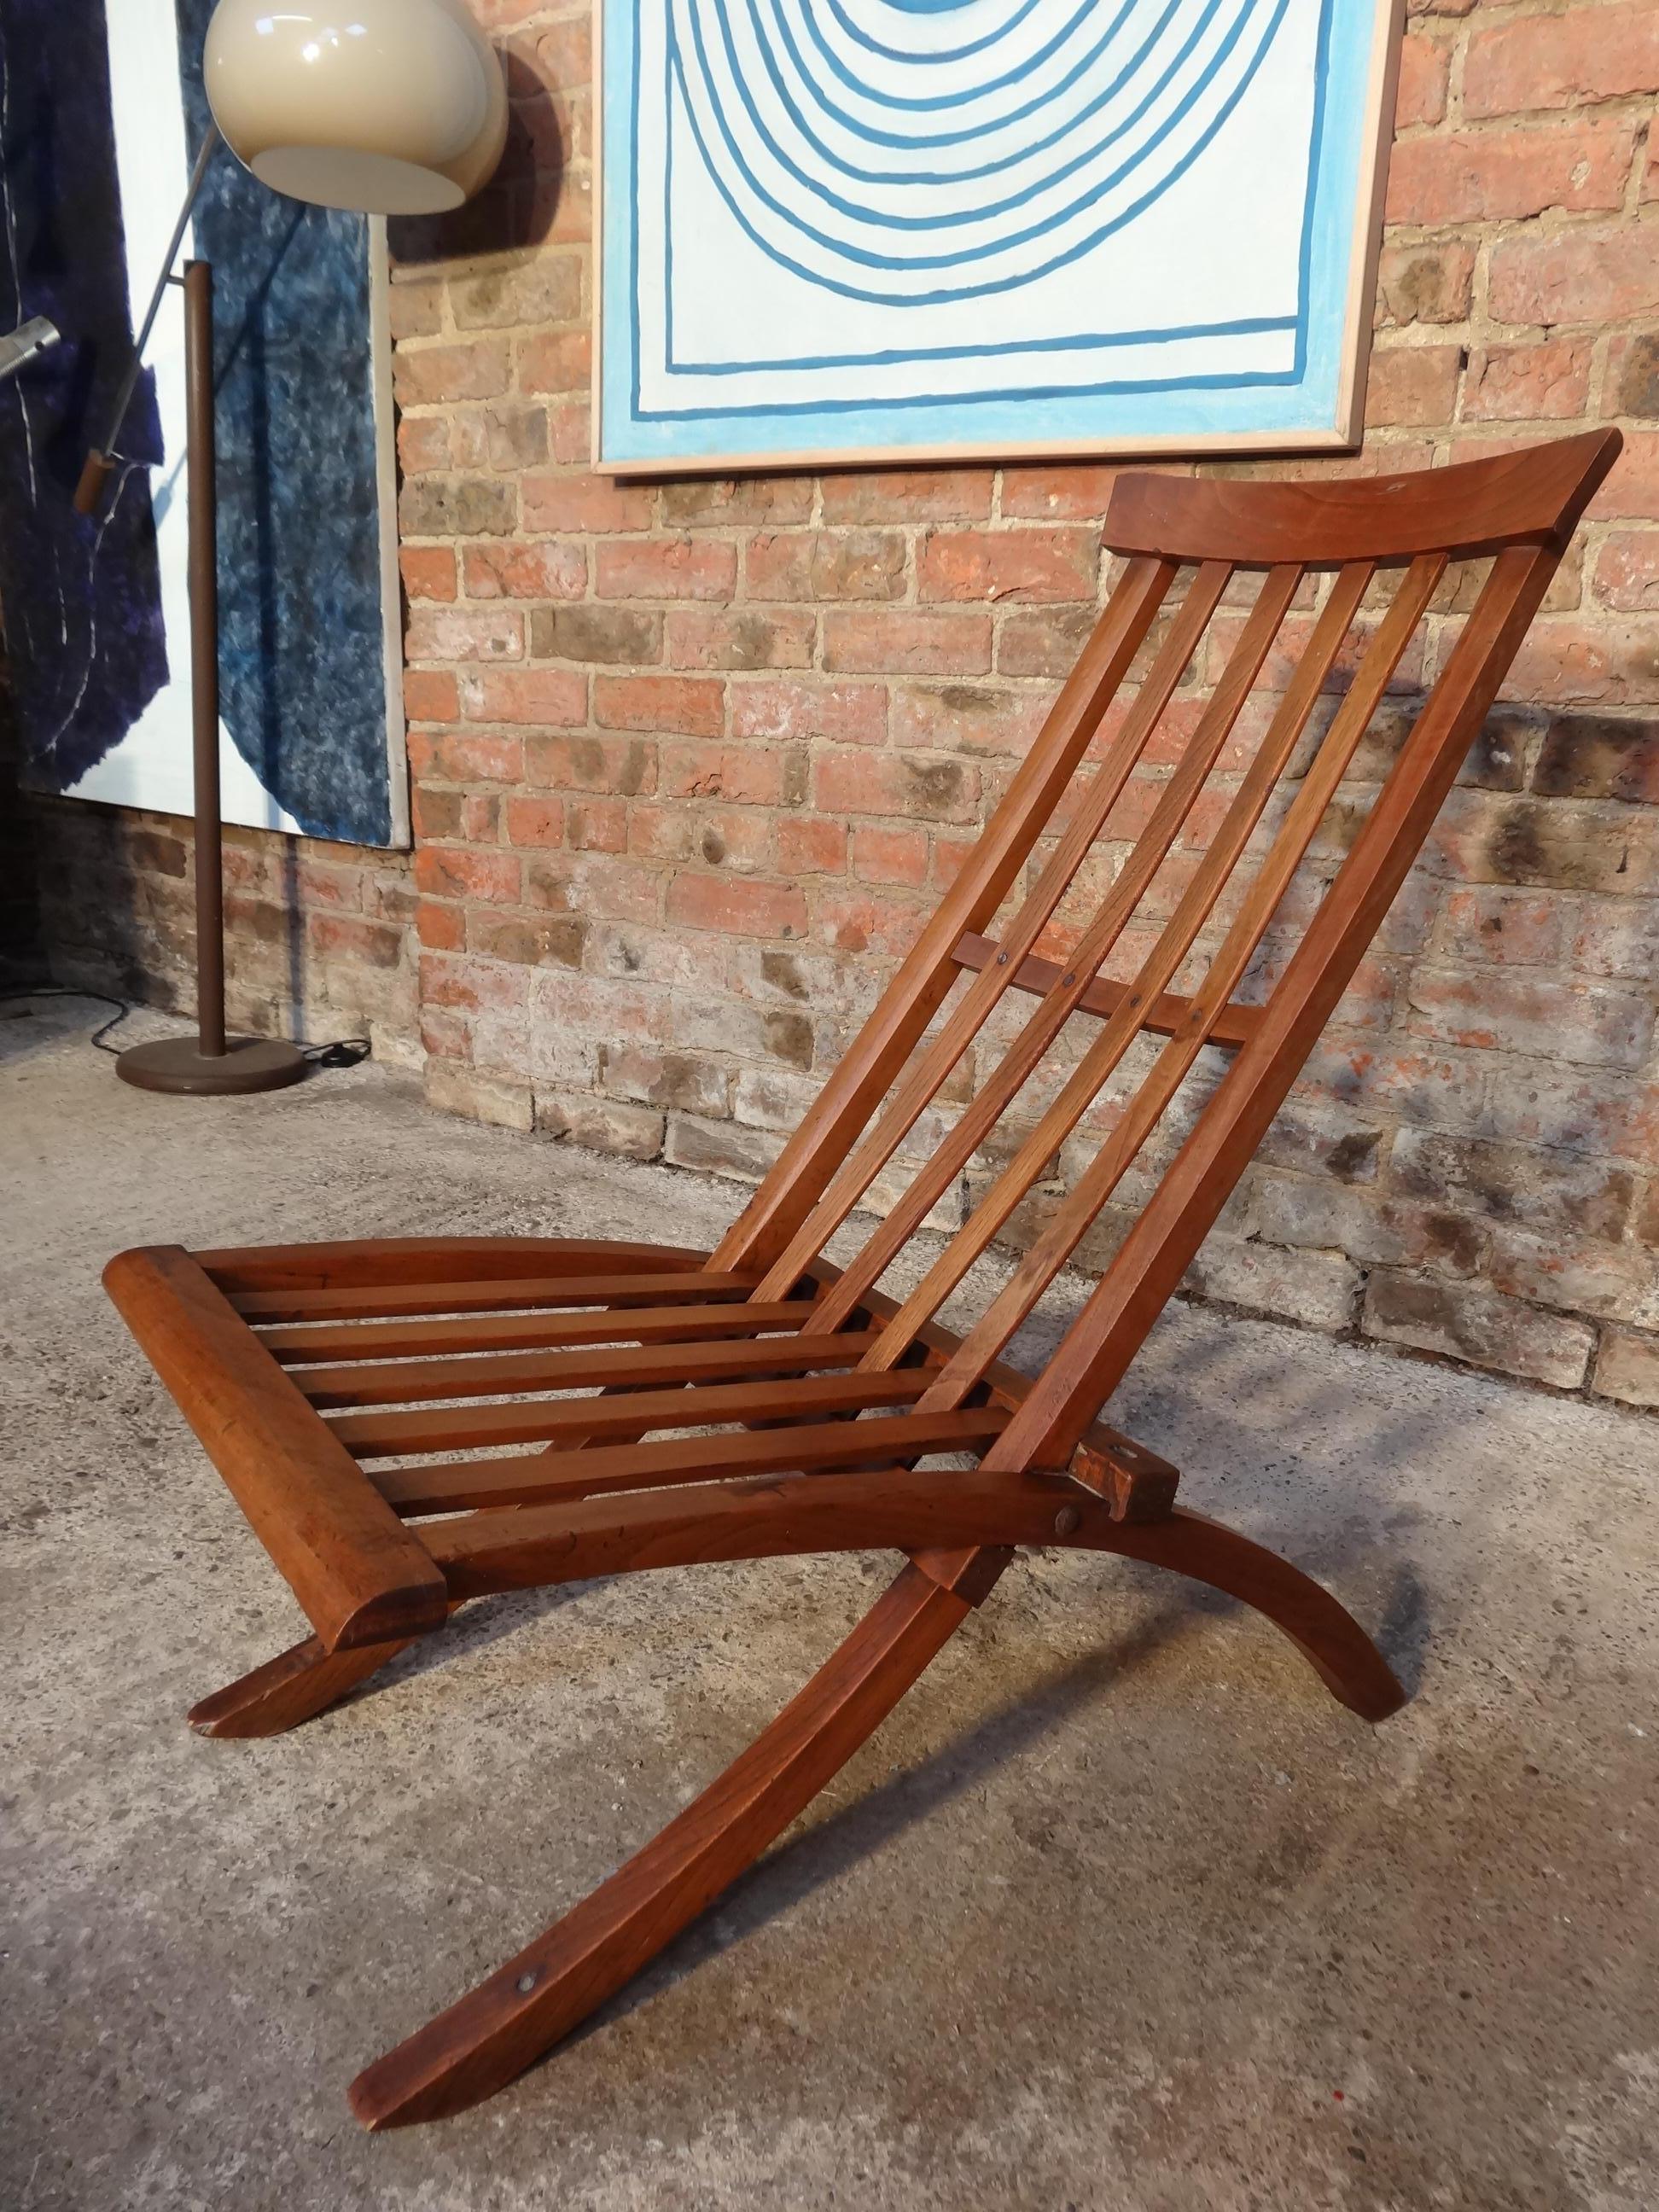 British Sculptural Antique circa 1890 Victorian English Solid Wooden Oak Folding Chair For Sale